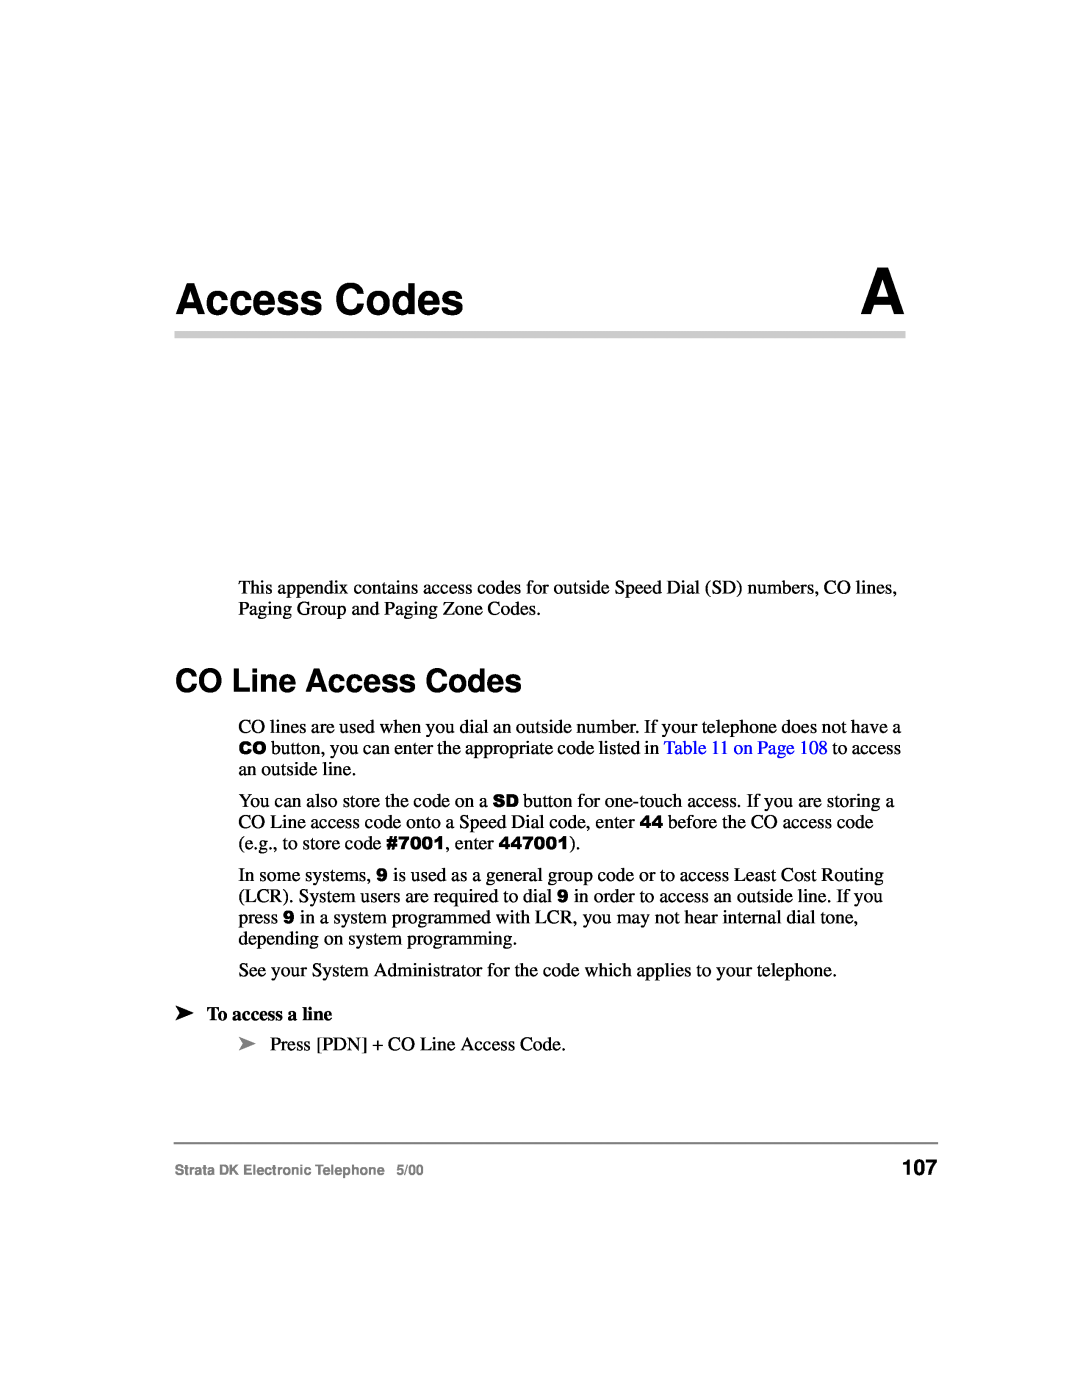 Toshiba Strata DK manual CO Line Access Codes, To access a line 